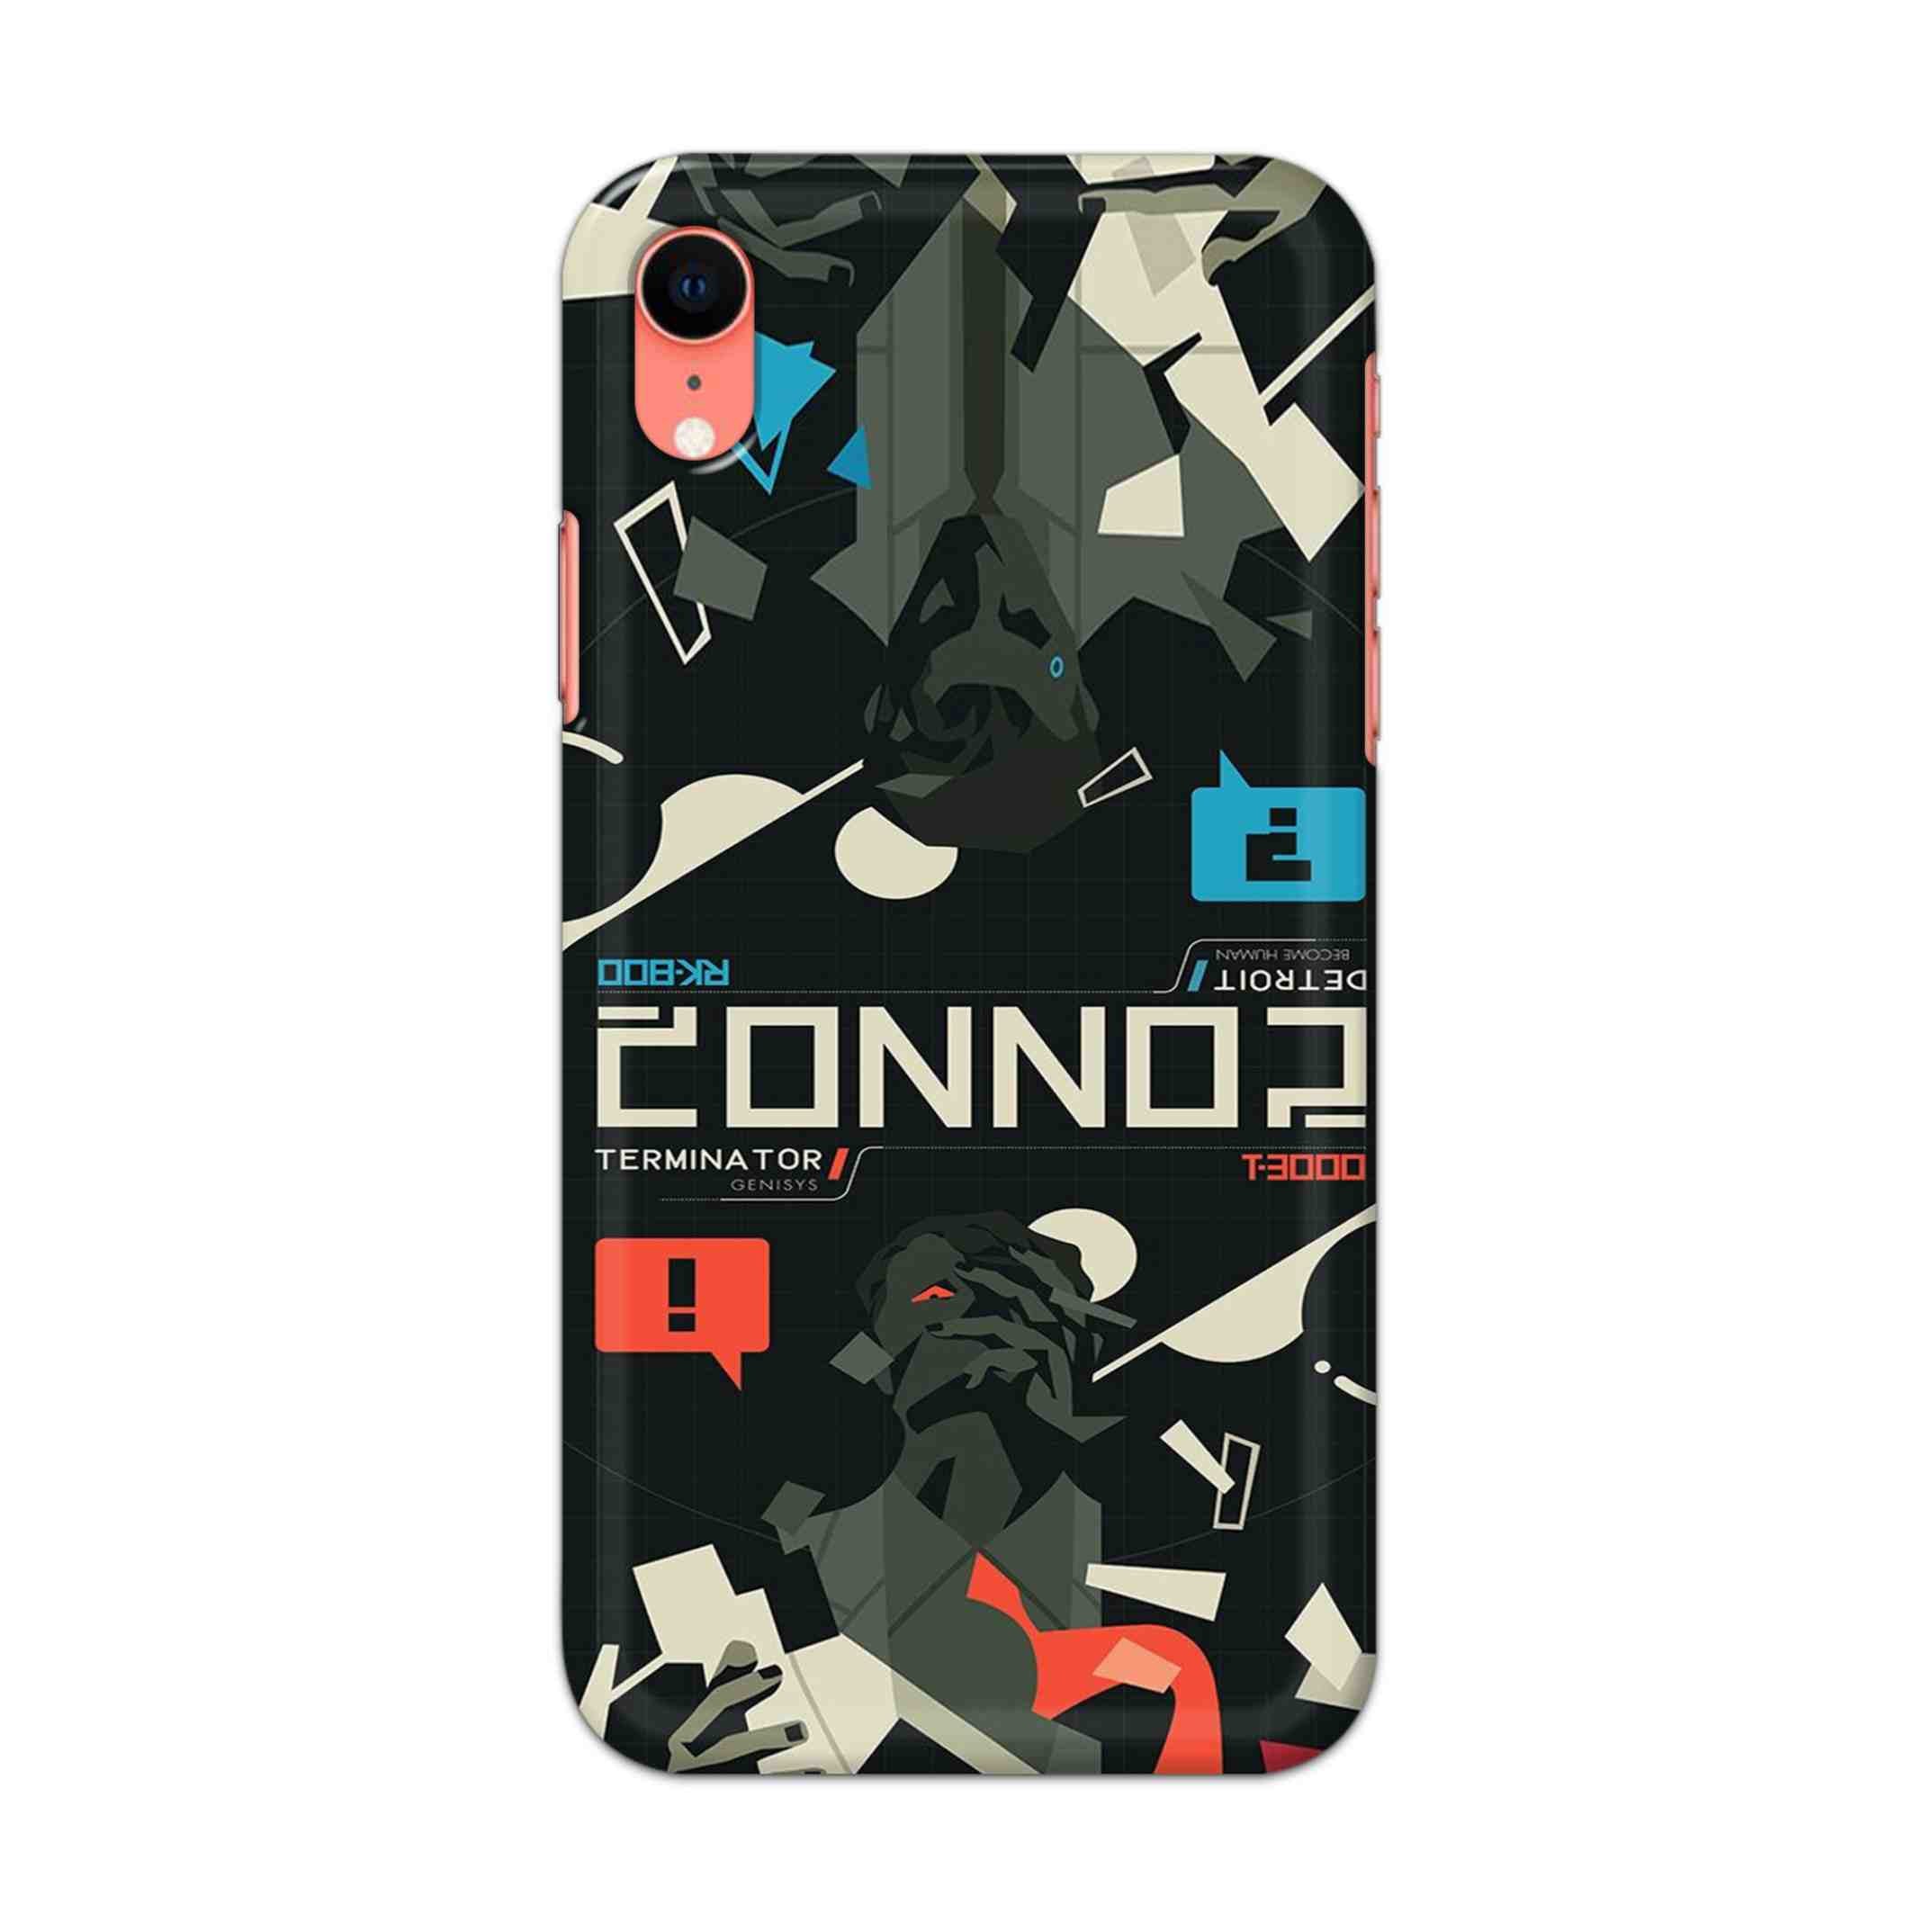 Buy Terminator Hard Back Mobile Phone Case/Cover For iPhone XR Online